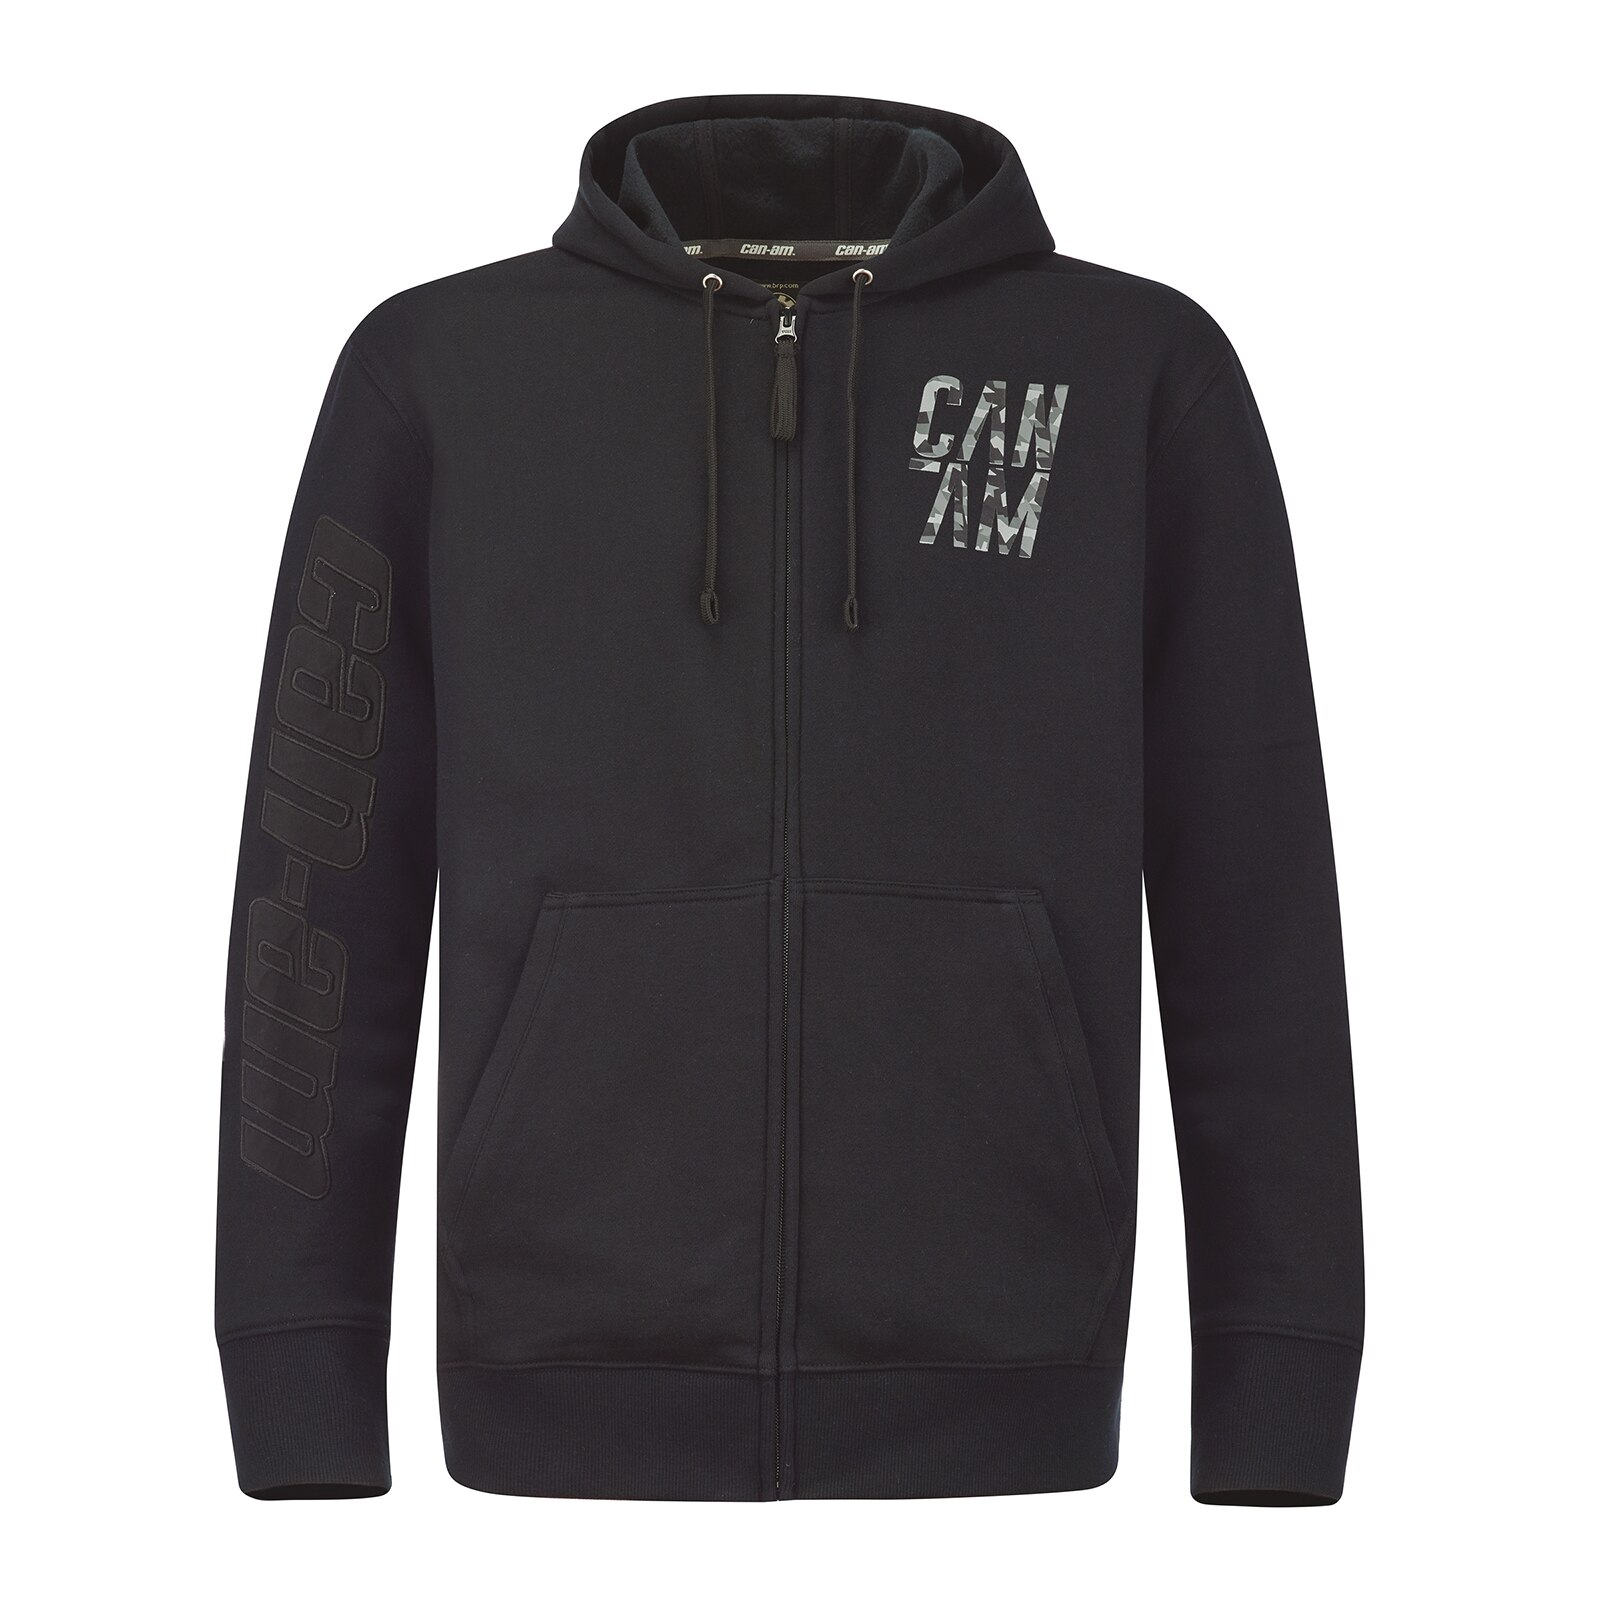 Zipped Hoodie | New arrivals | Can-Am